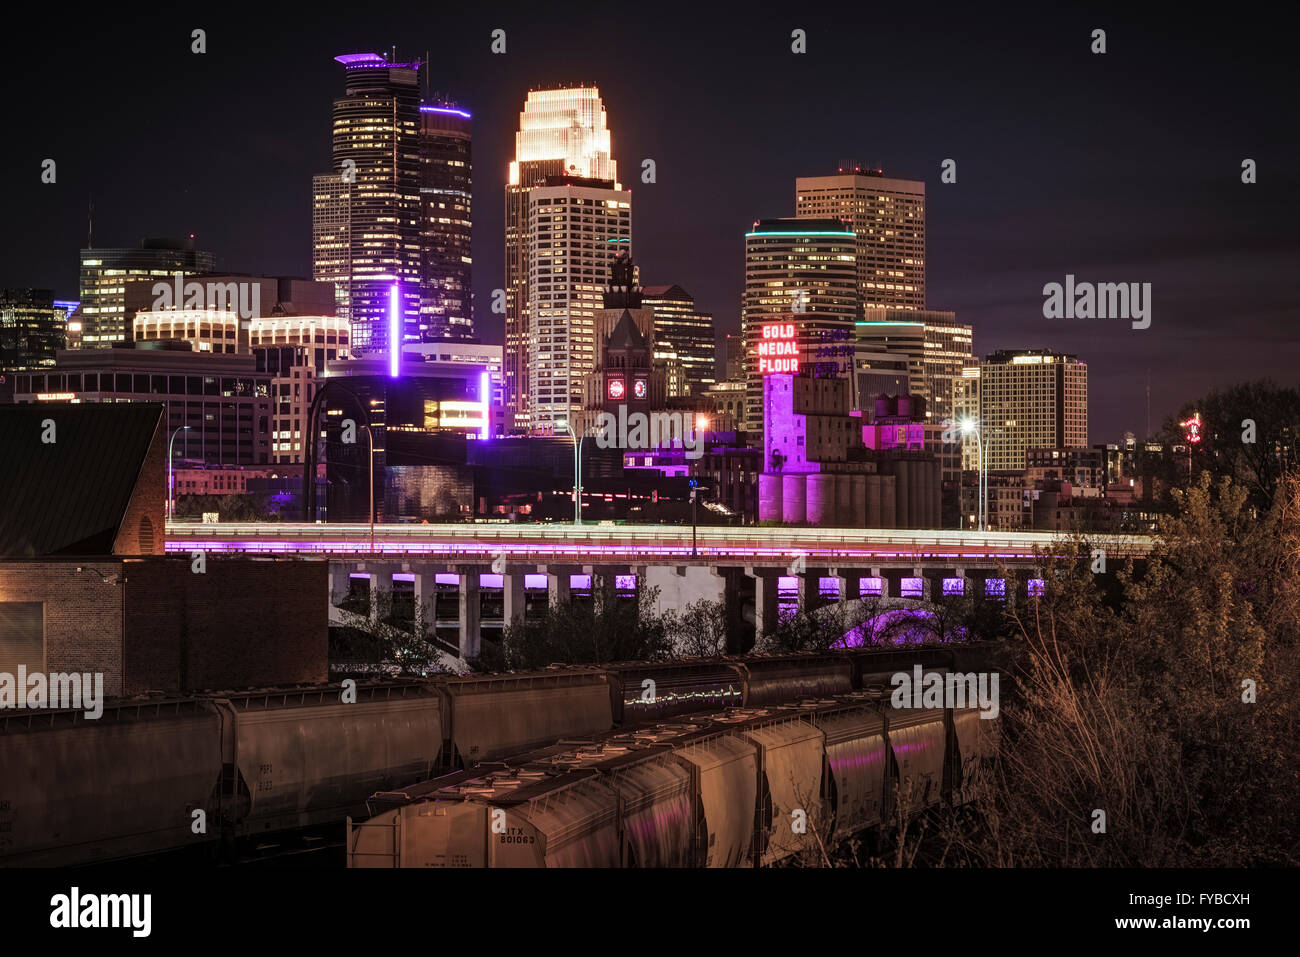 Minneapolis skyline in purple mourning the passing of the musical artist Prince. Stock Photo